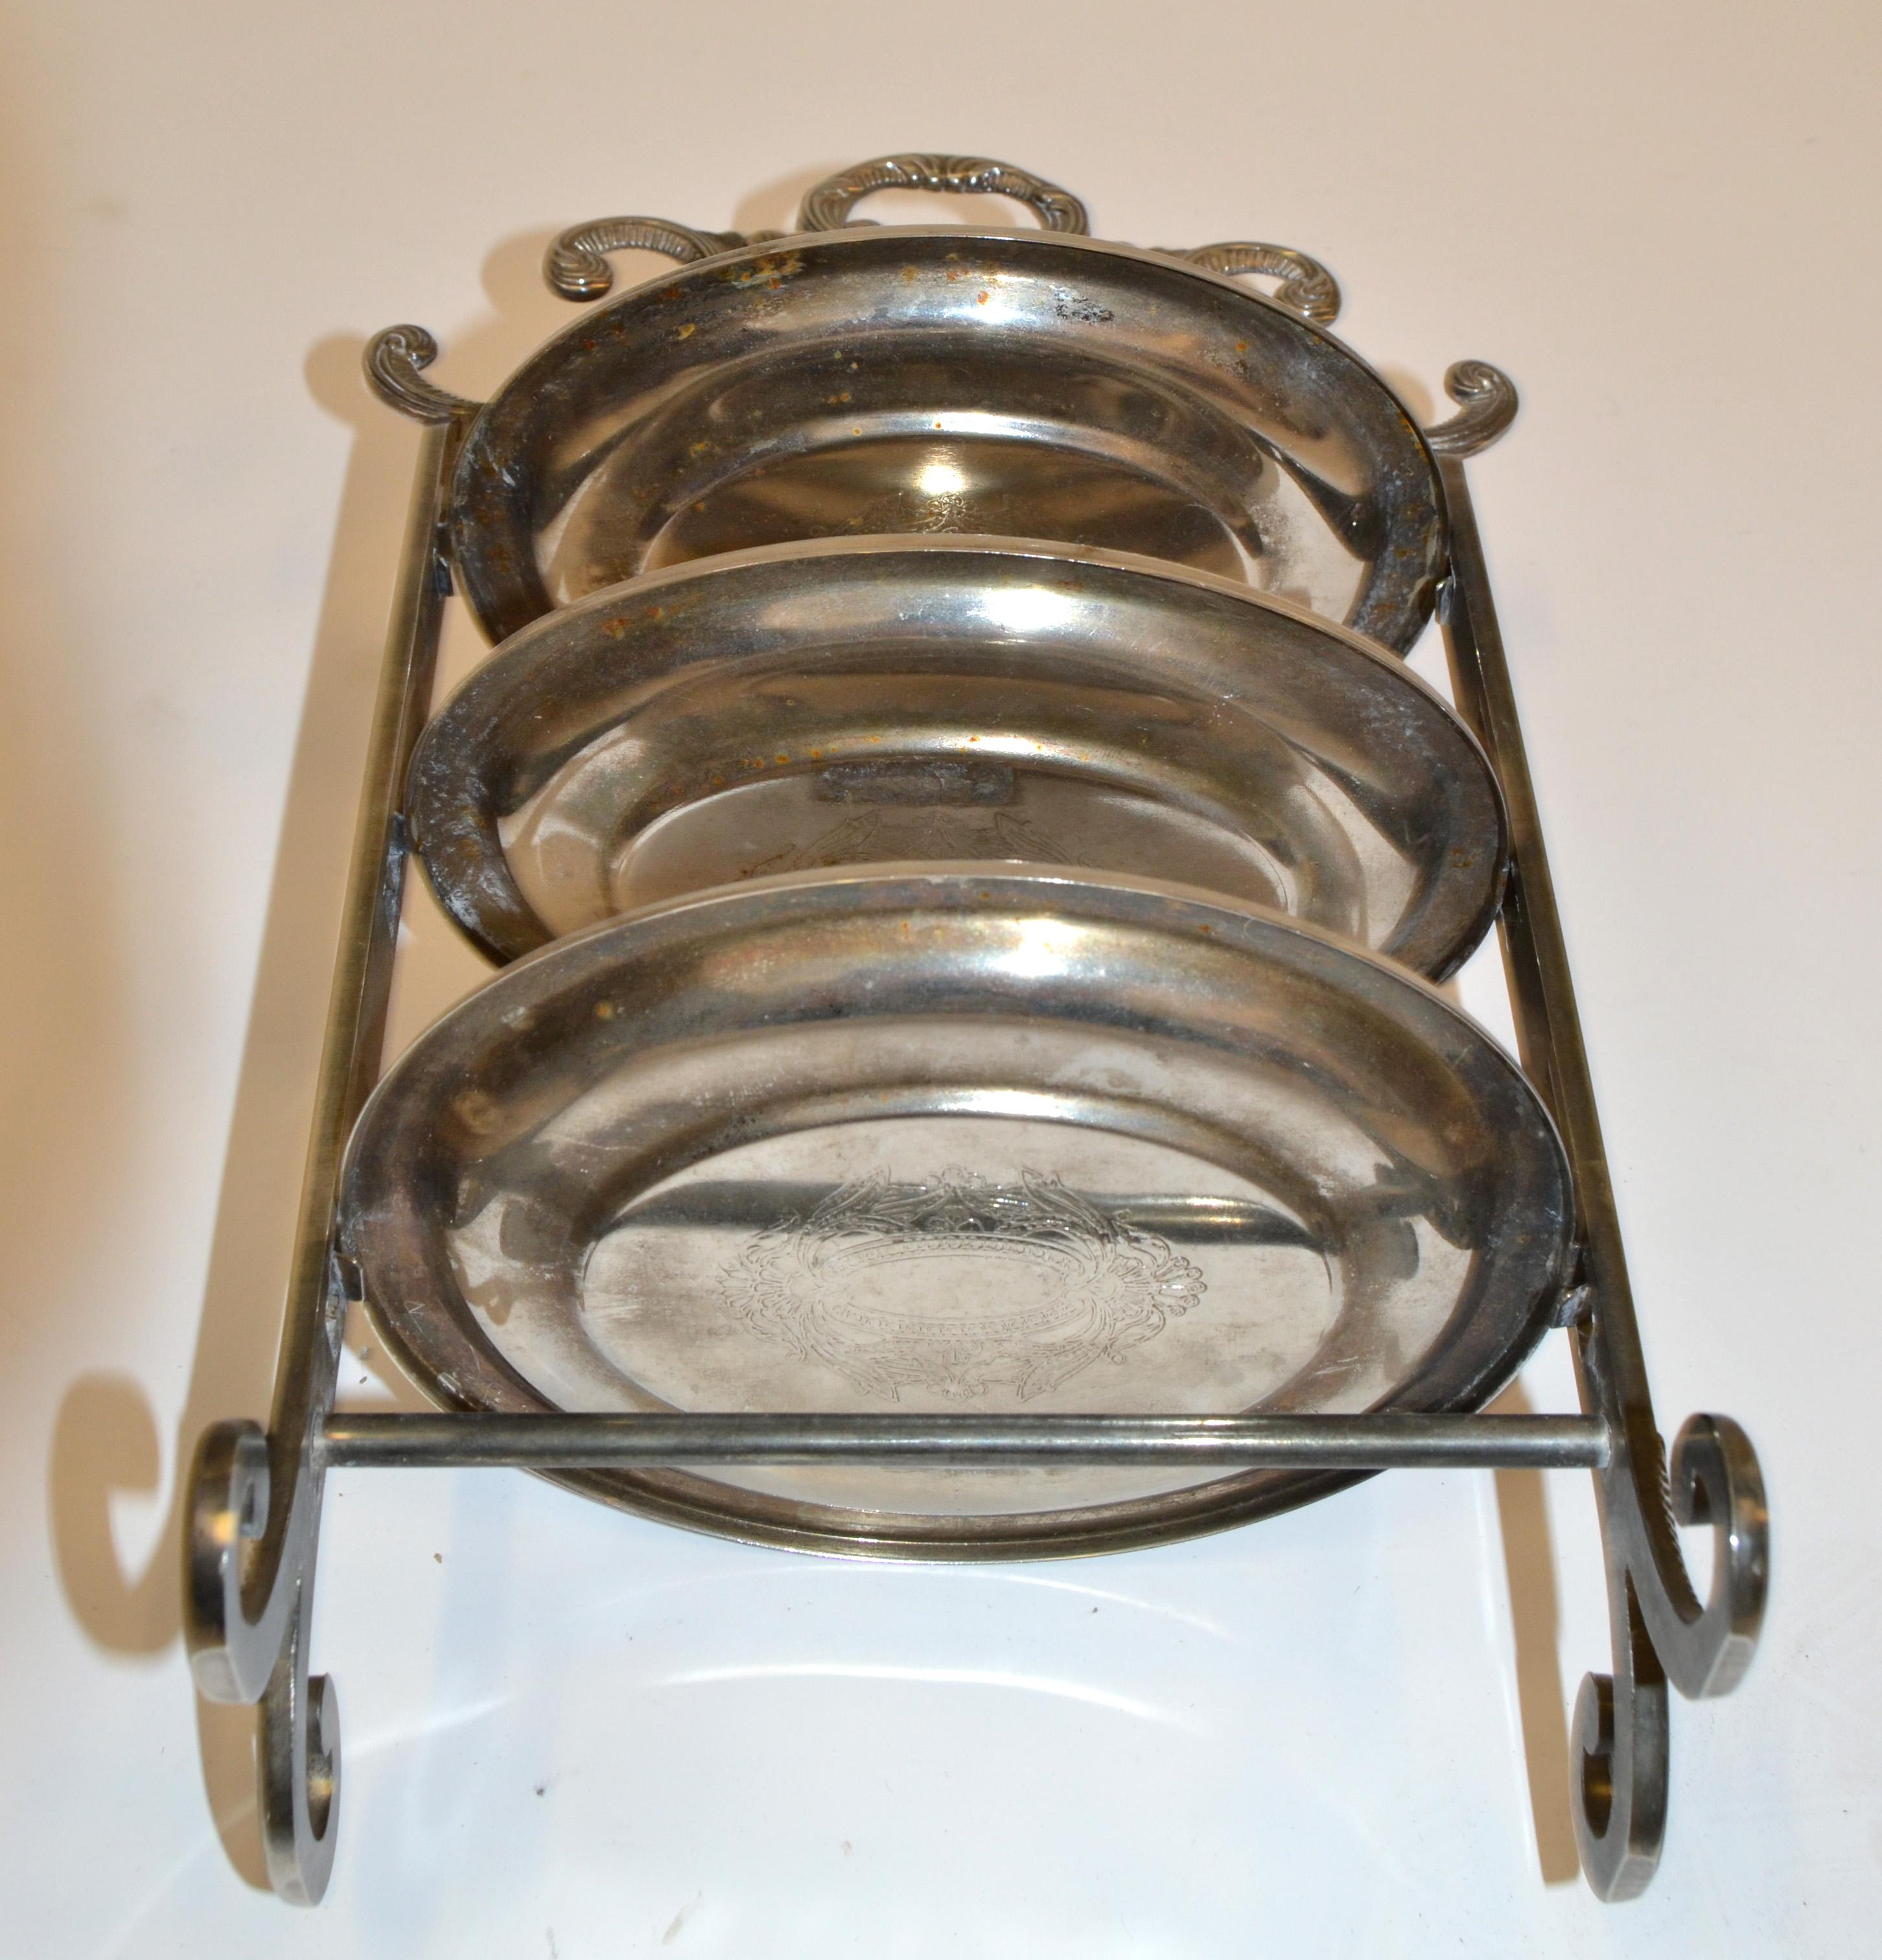 Edwardian Style Three-Tier Silver Plated Cake Stand Patisserie Stand Server Fork 3